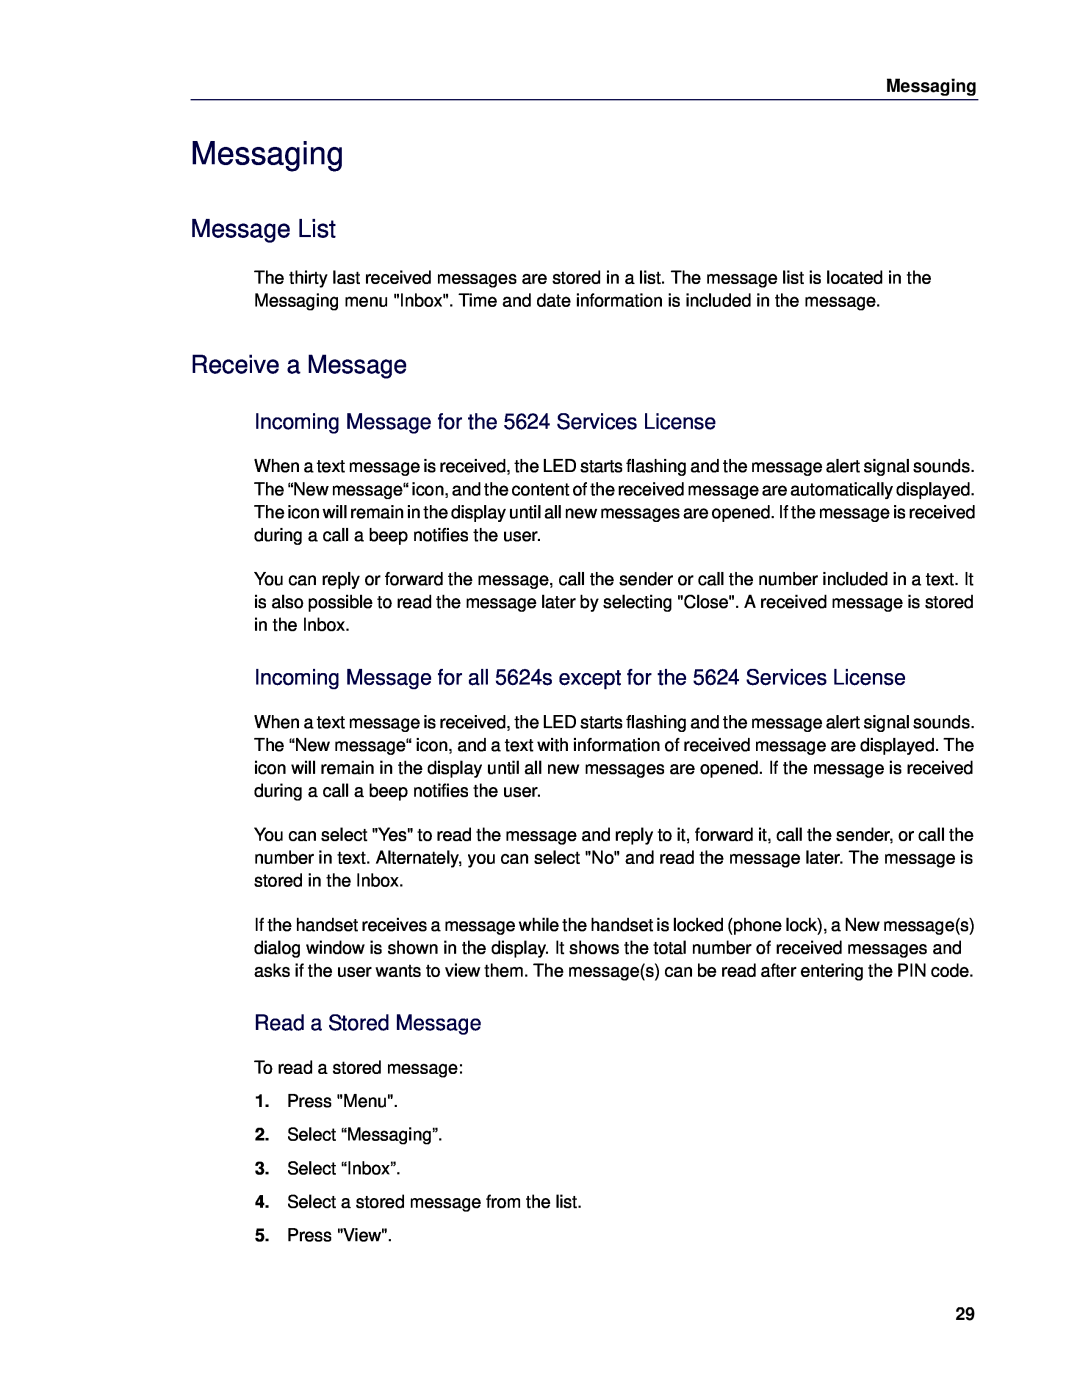 Mitel Messaging, Message List, Receive a Message, Incoming Message for the 5624 Services License, Read a Stored Message 